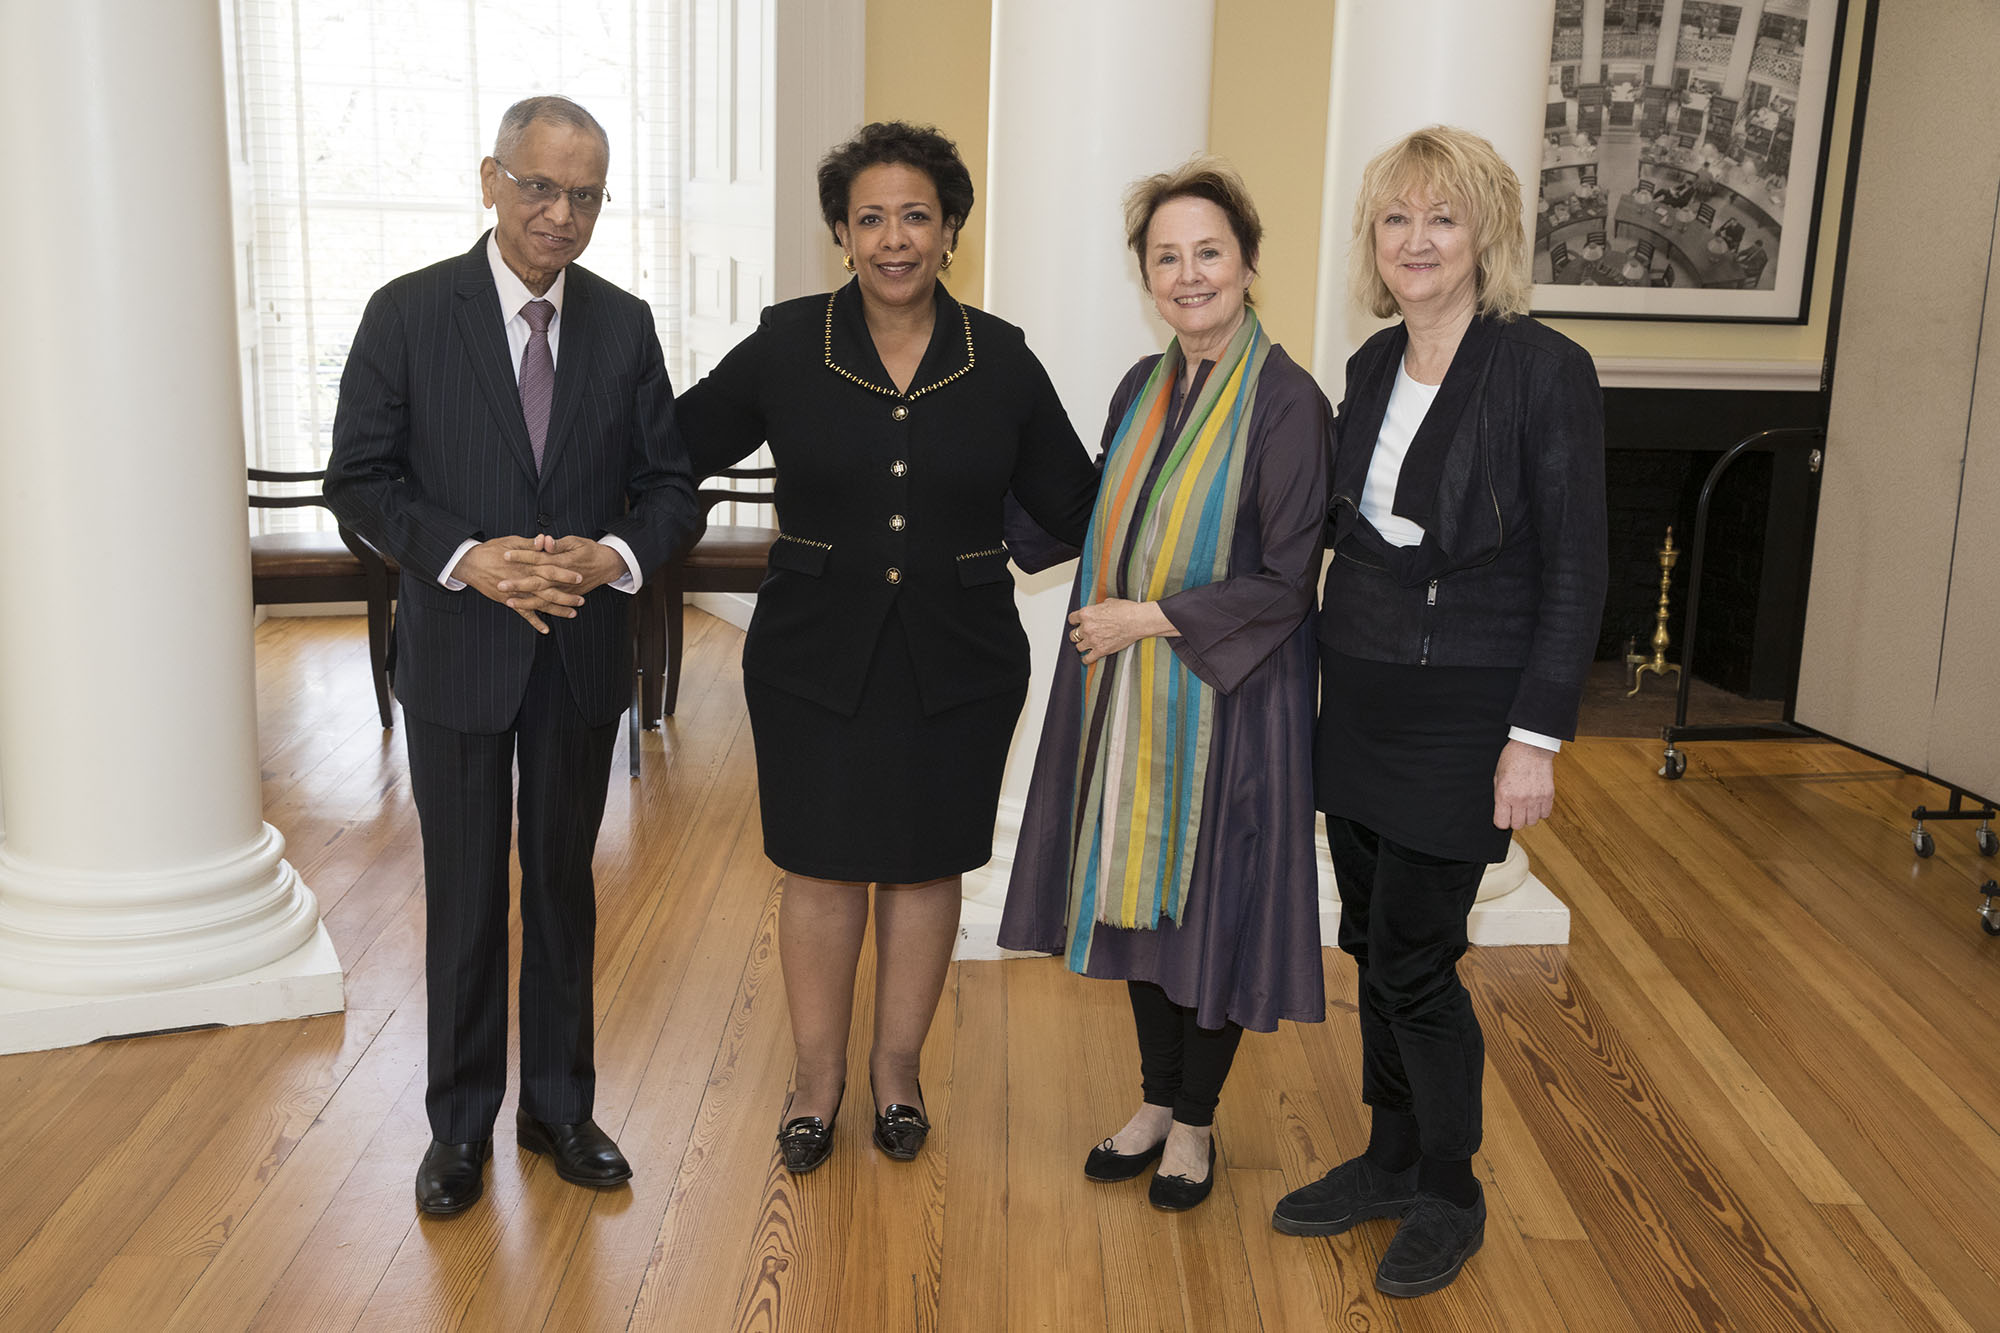 group photo Left to right: N.R. Narayana Murthy, Loretta Lynch, Alice Waters and Yvonne Farrell. Not pictured: Shelley McNamara